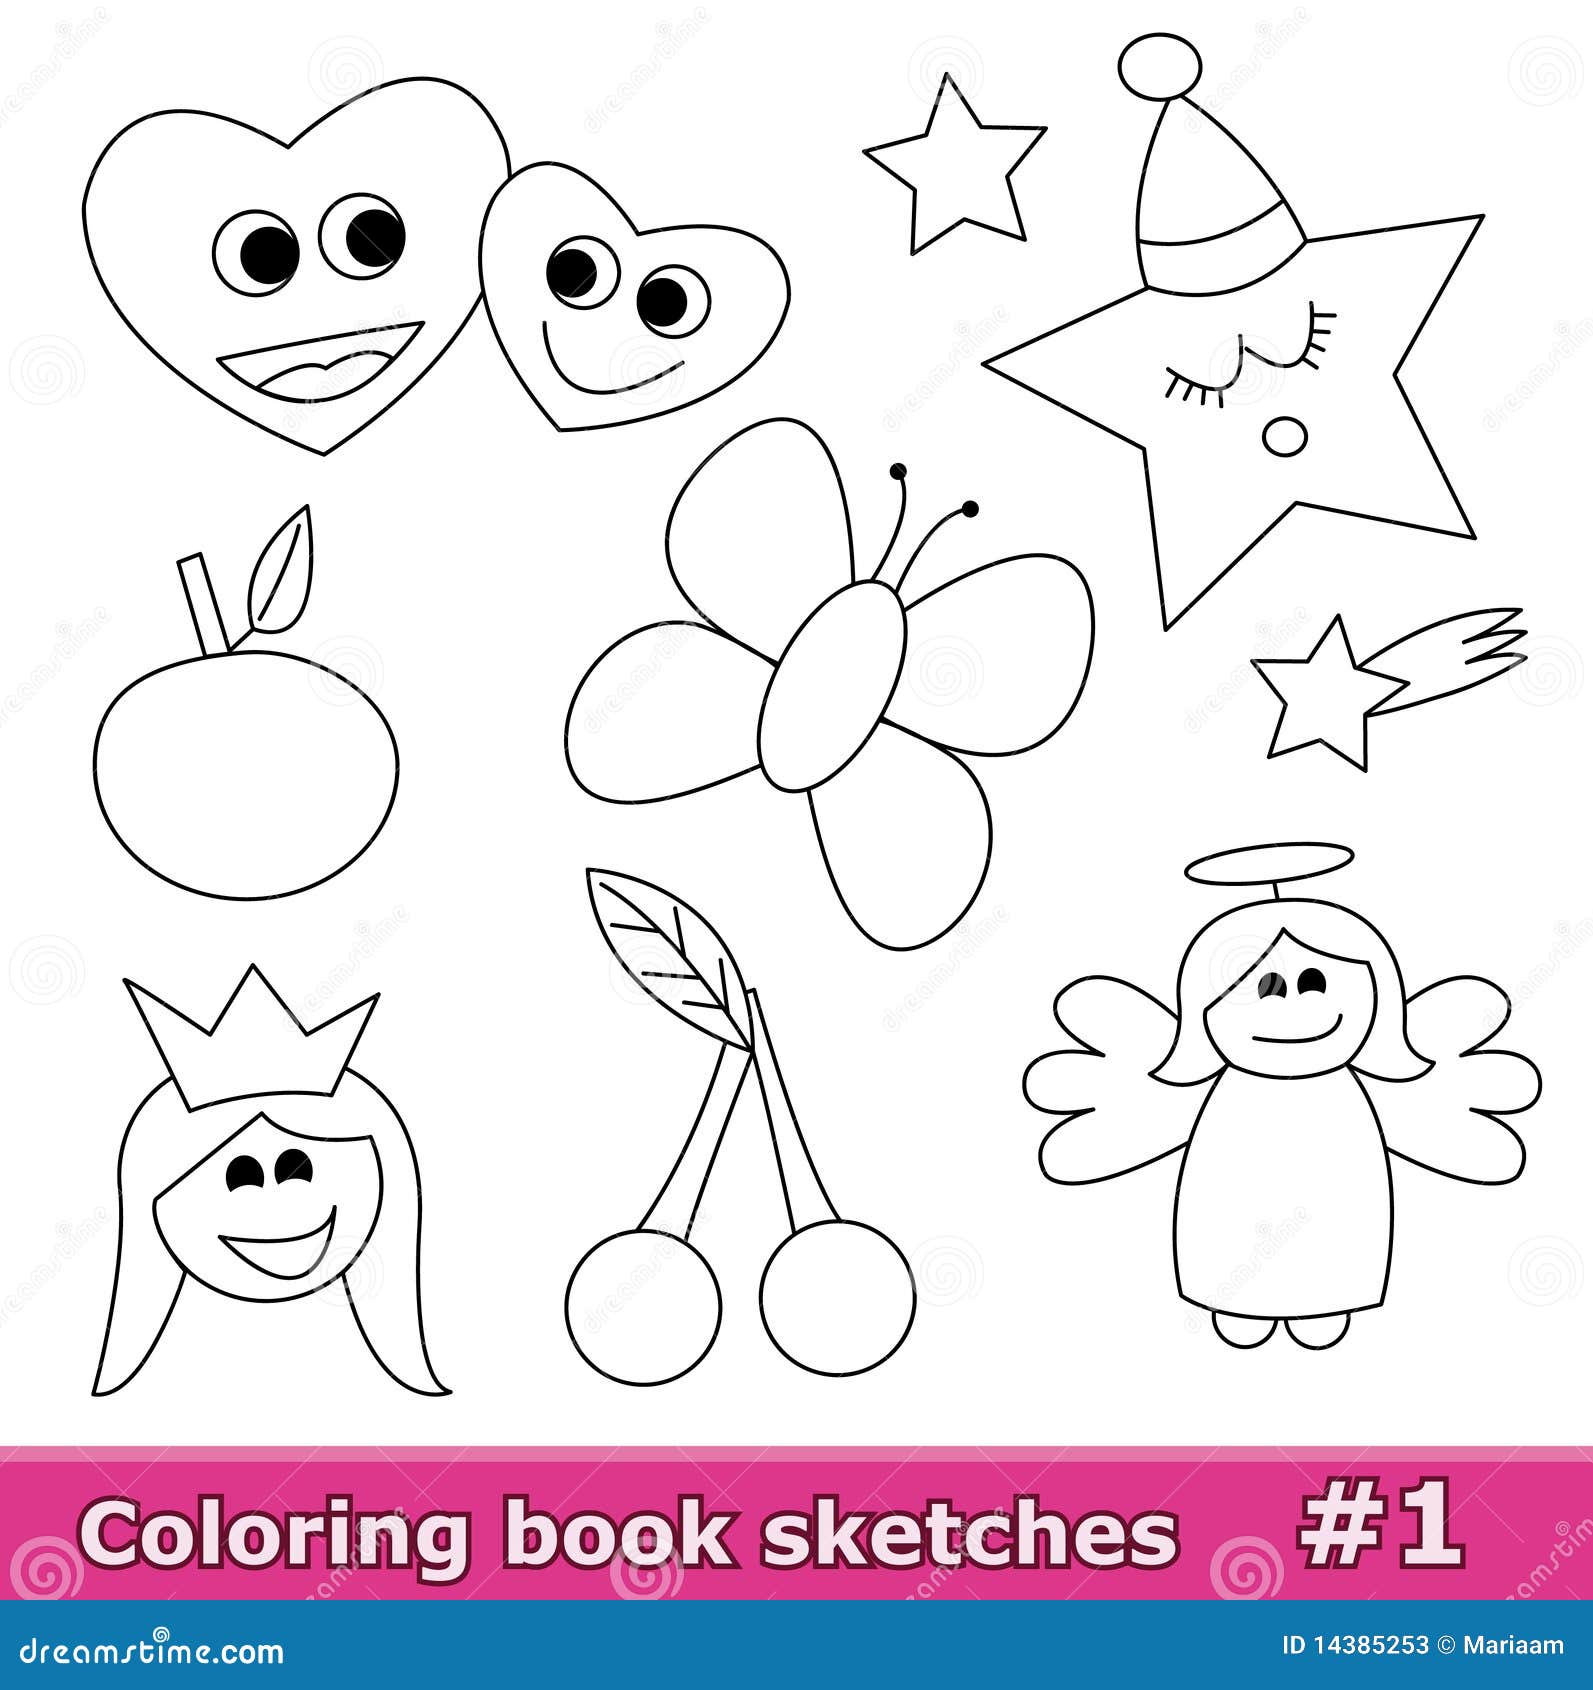 coloring book sketches, part 1